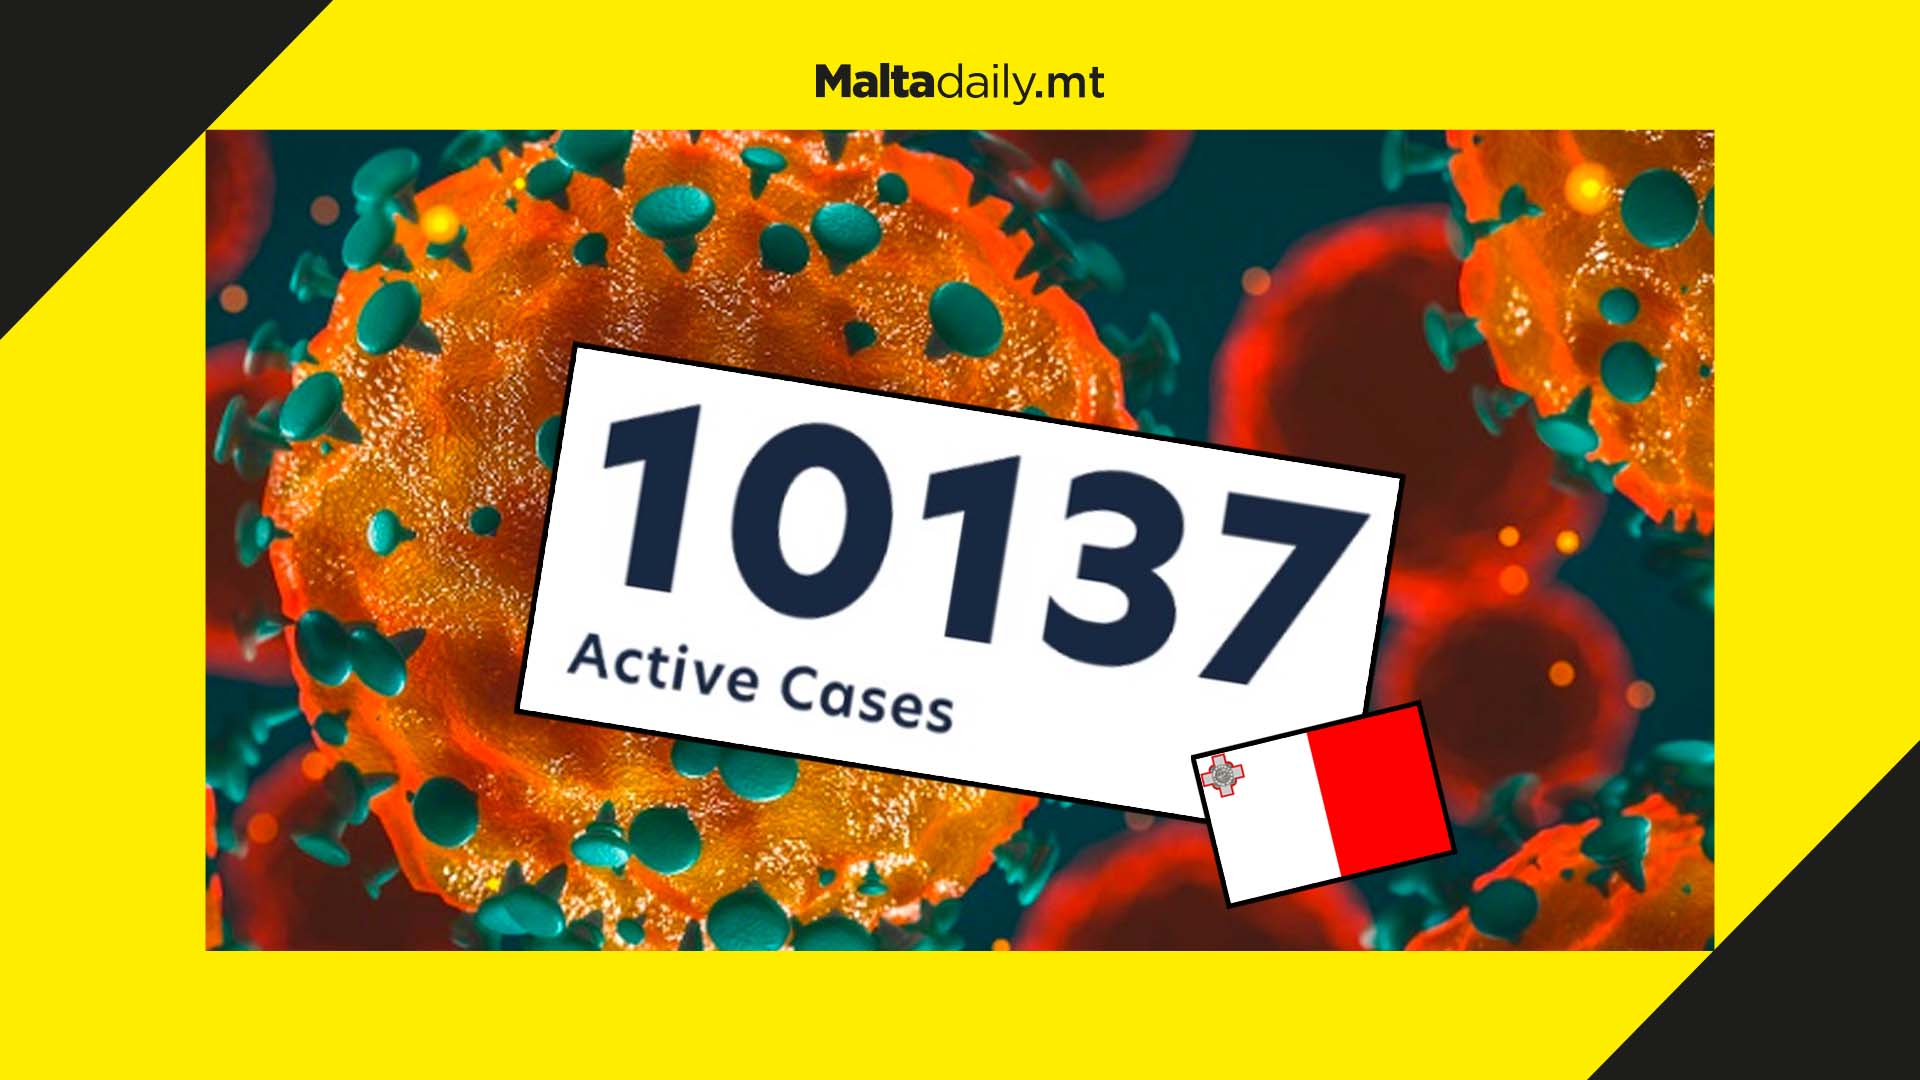 Malta registers over 10,000 active cases in yet another record